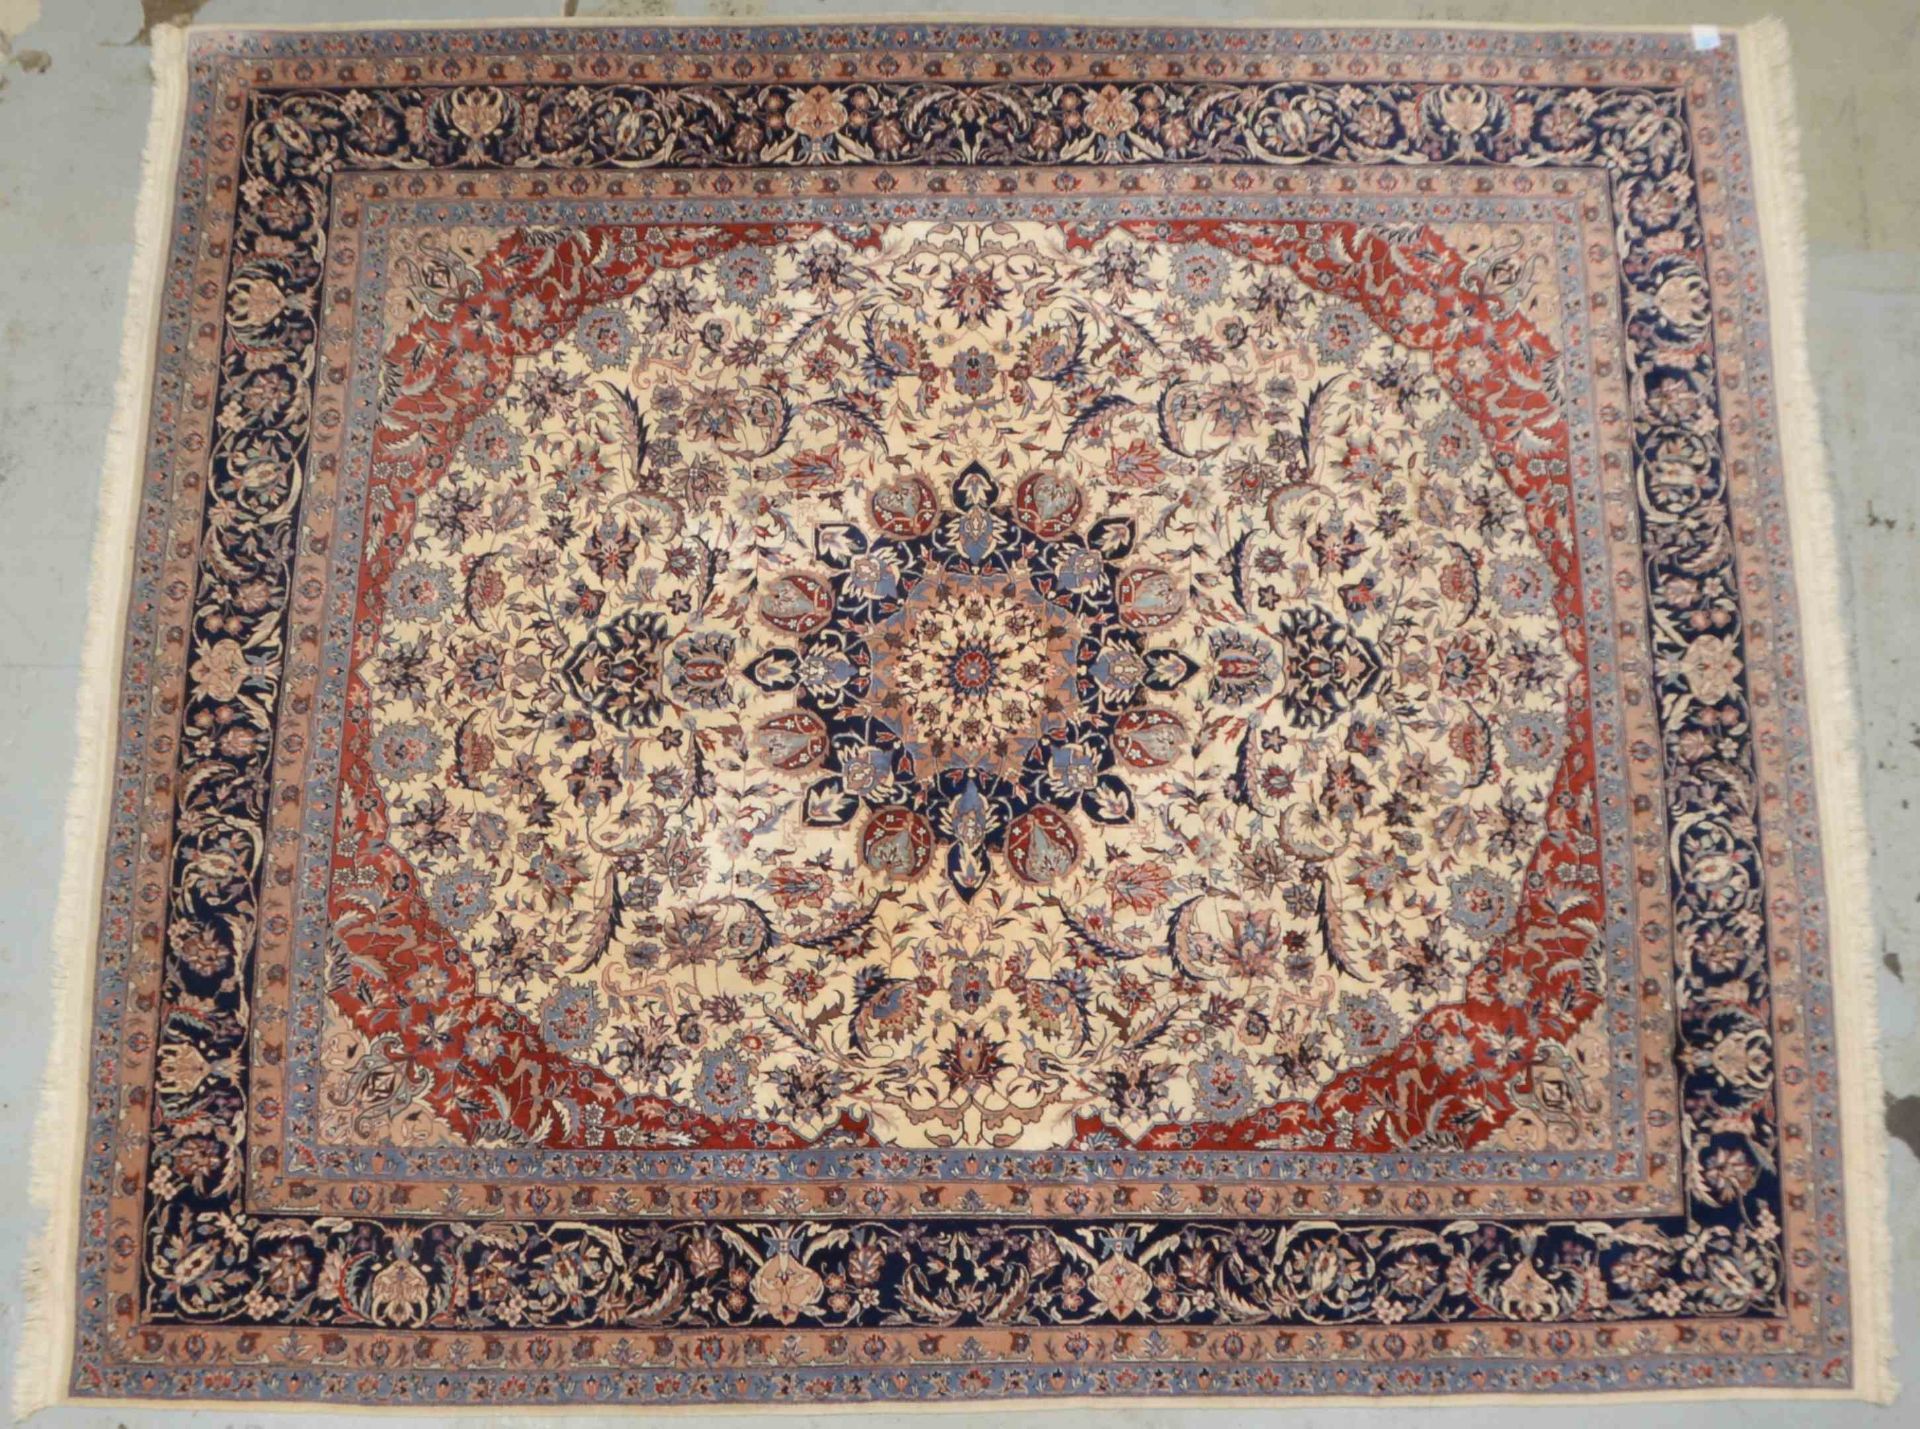 Isfahan (China), sehr feine Knüpfung, Flor in gutem Zustand; Maße 310 x 260 cm